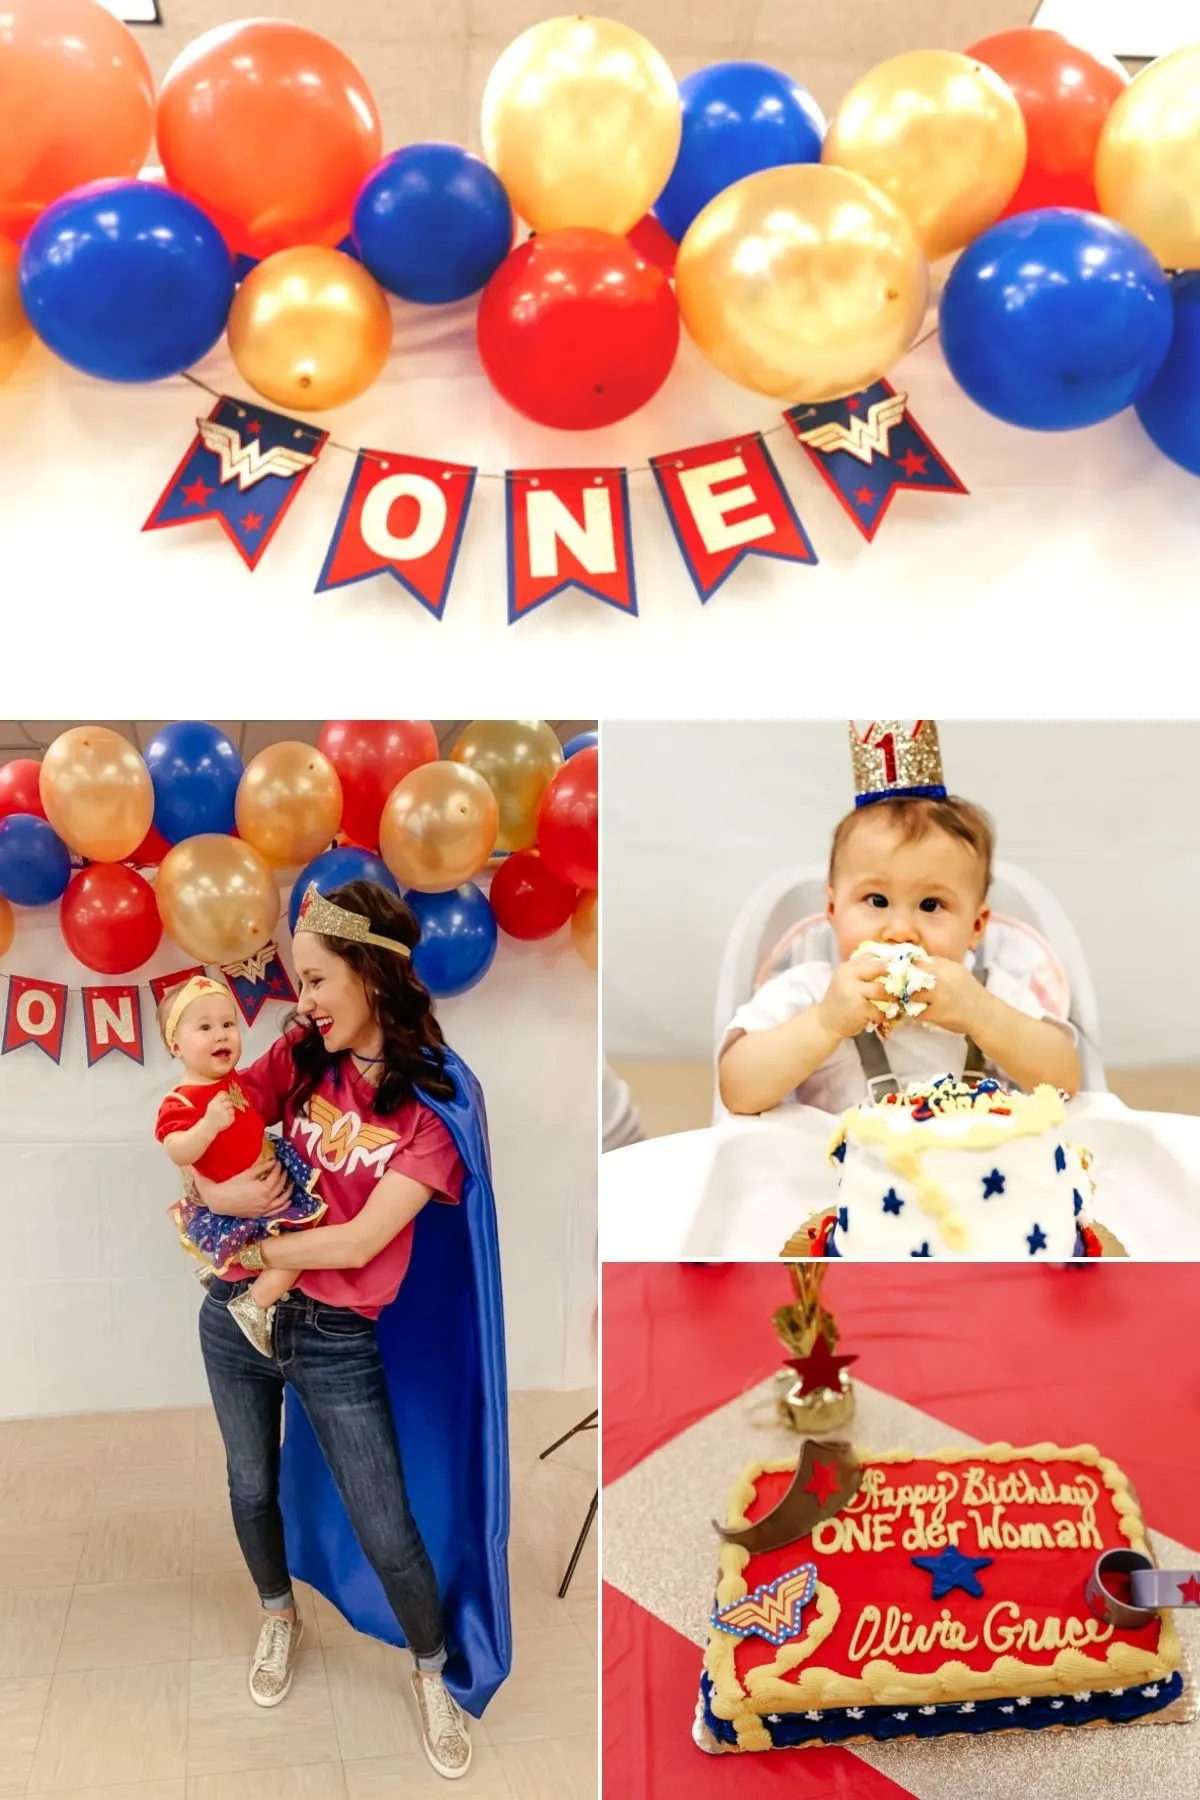 Collage of photos from Wonderwoman first birthday party theme.